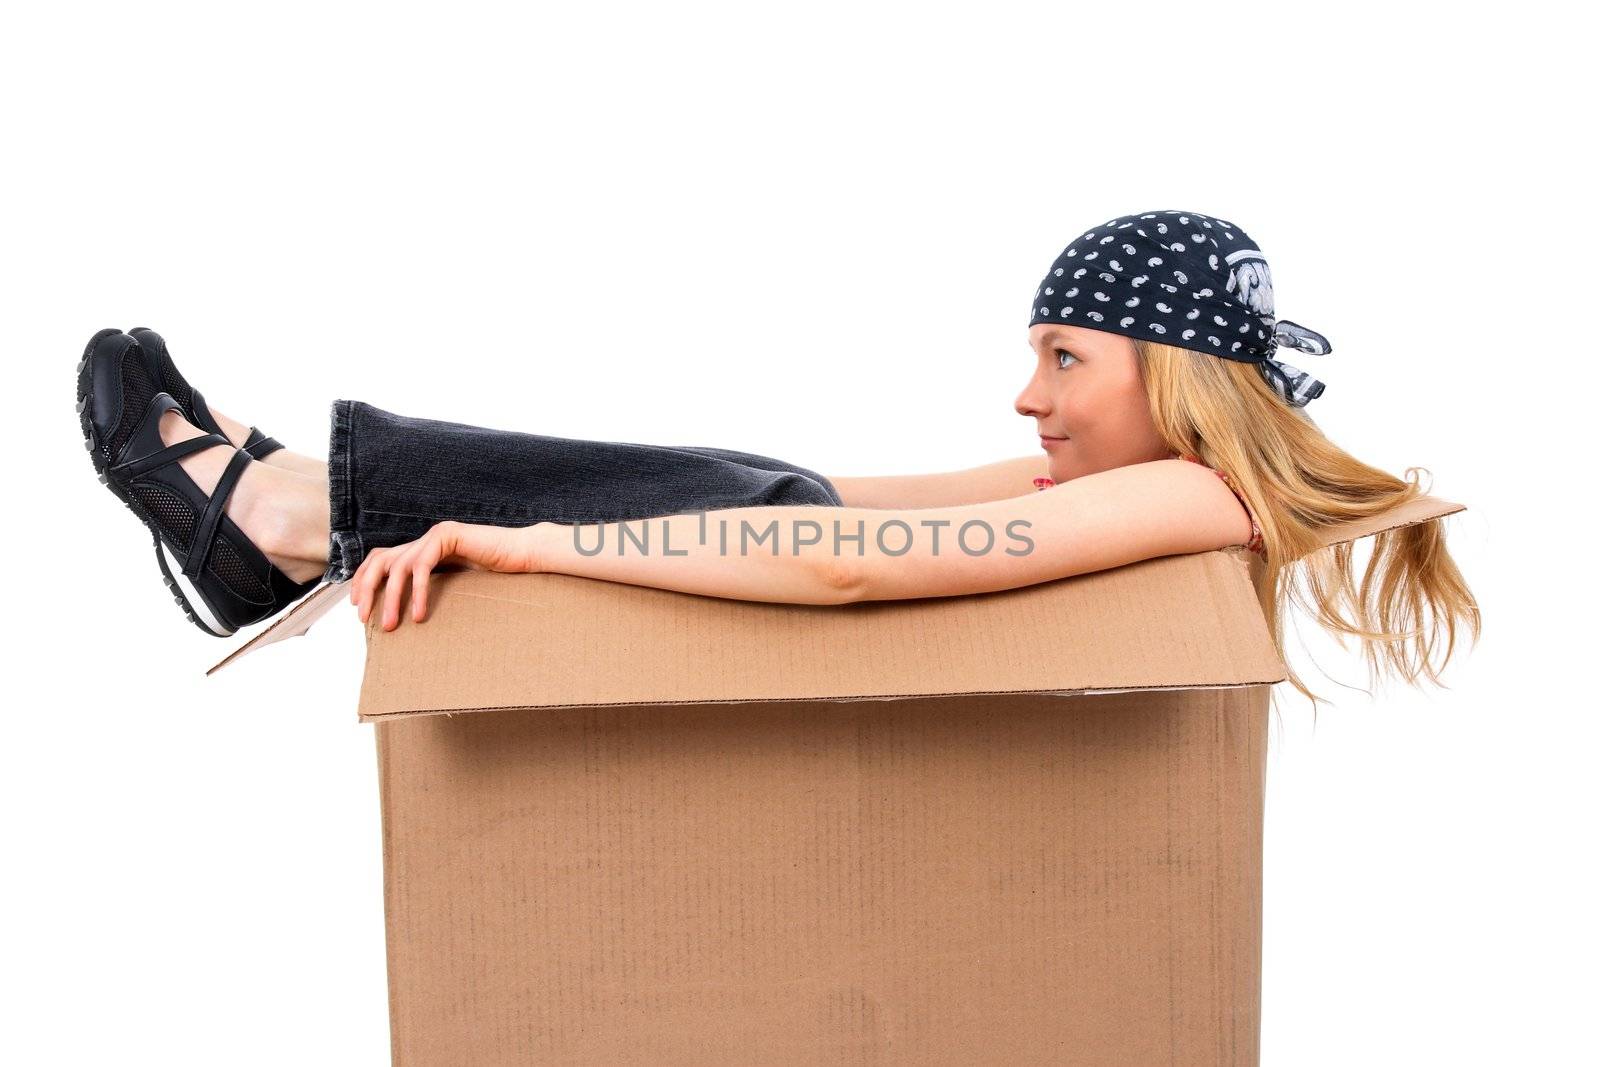 Girl sitting in a cardboard box, copy space, isolated on white.